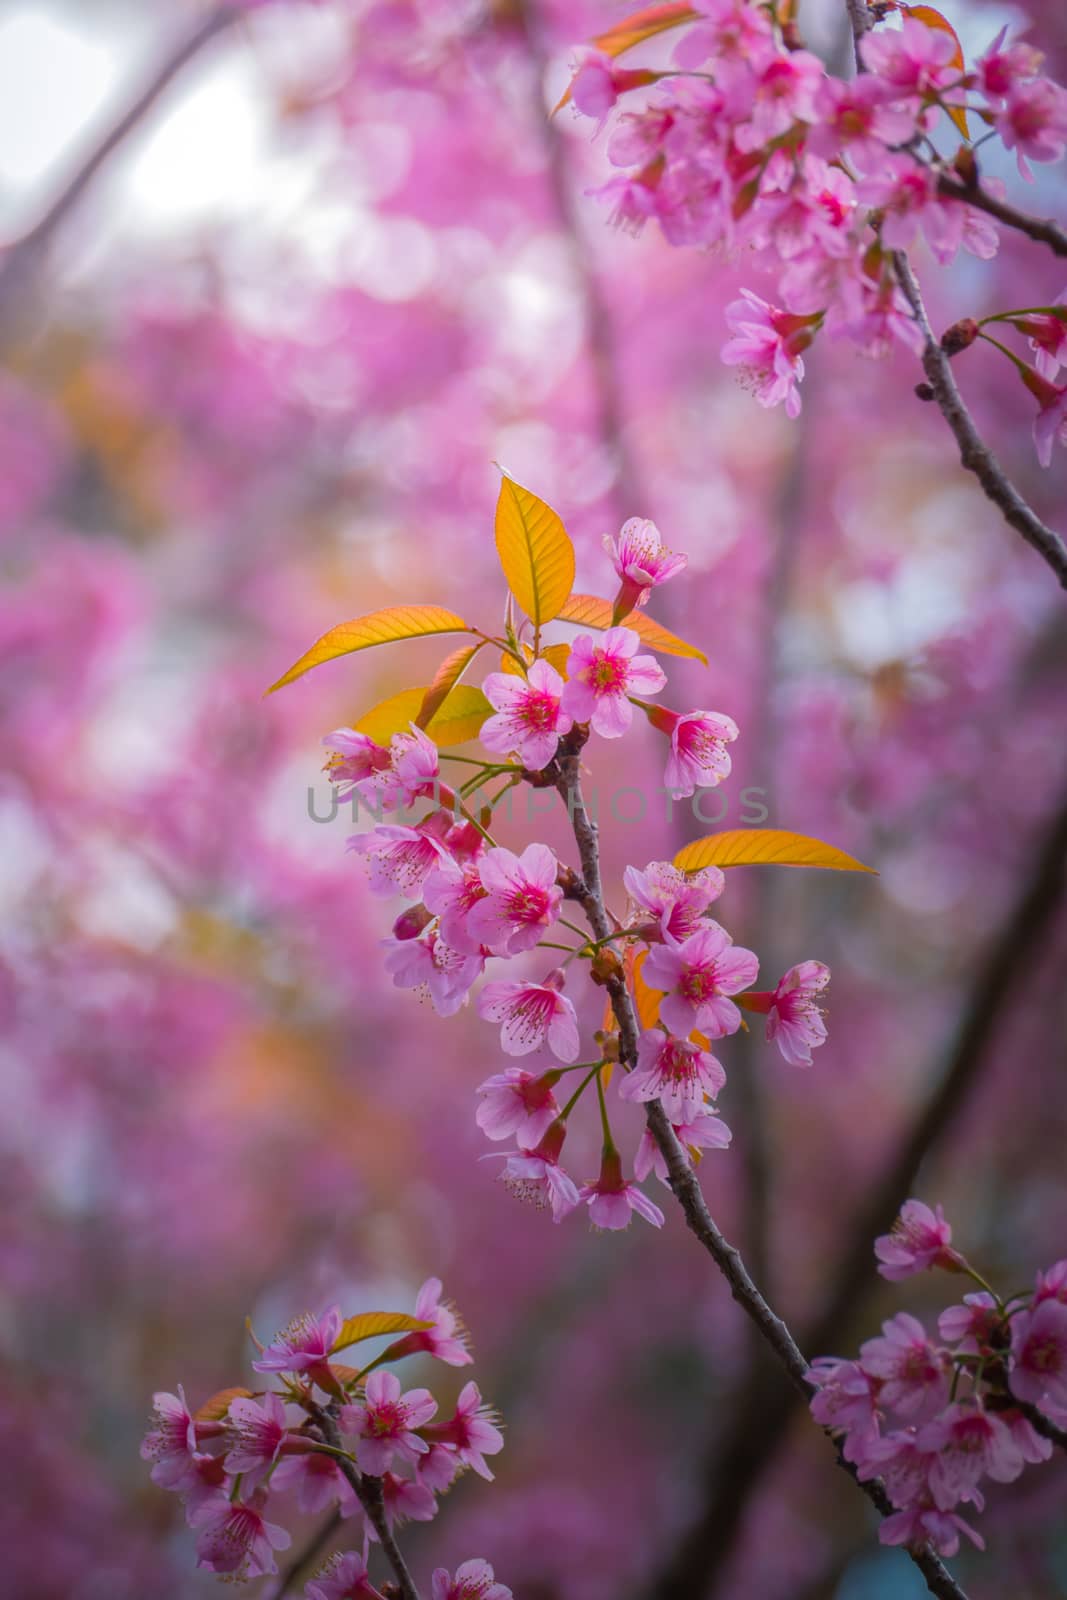 Sakura flowers blooming blossom in Chiang Mai, Thailand by teerawit